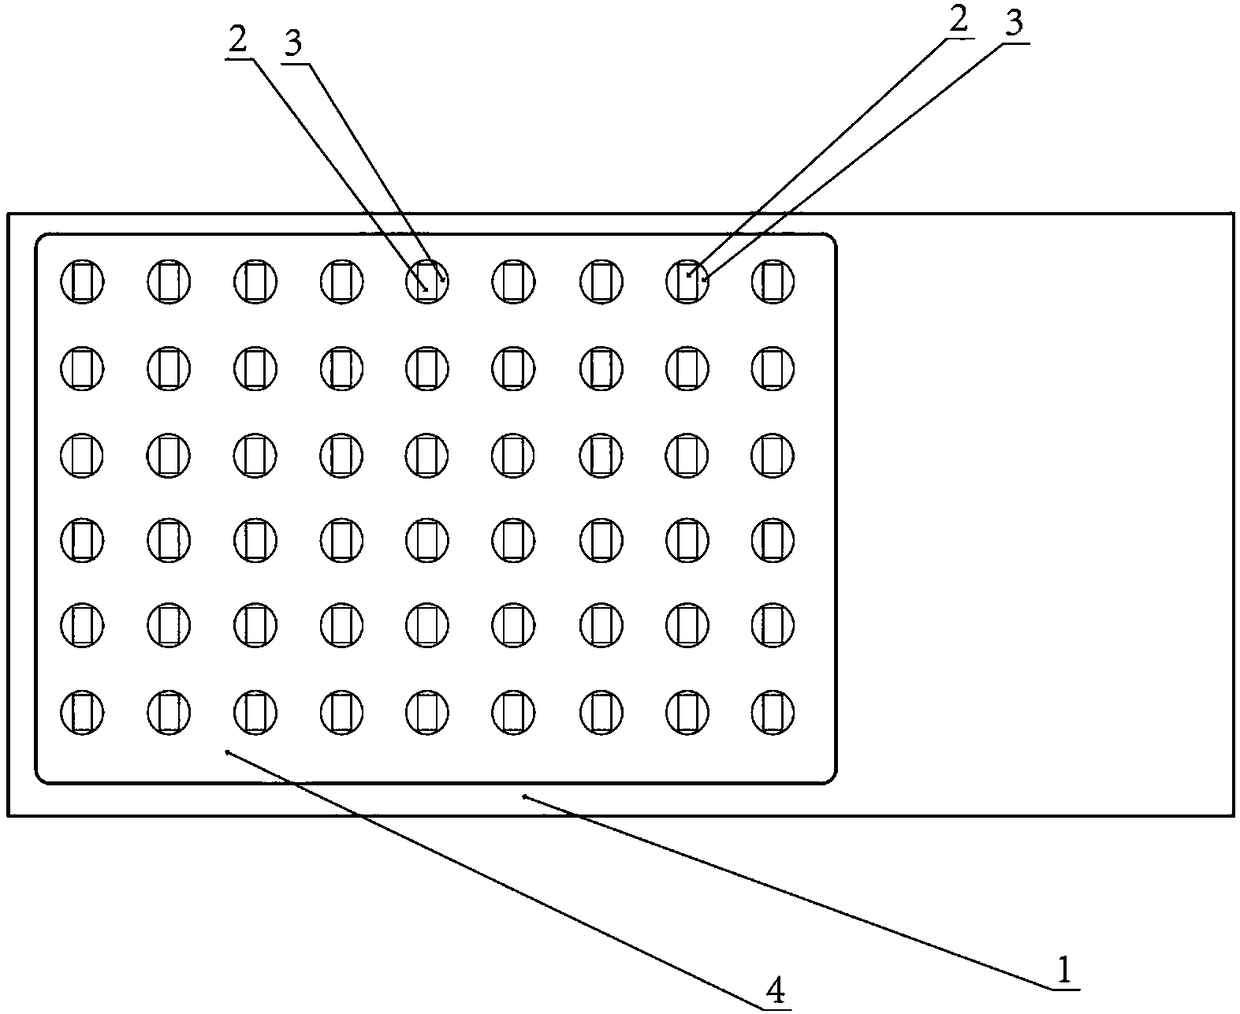 Double-sided light emitting diode (LED) light source structure based on COB packaging structure